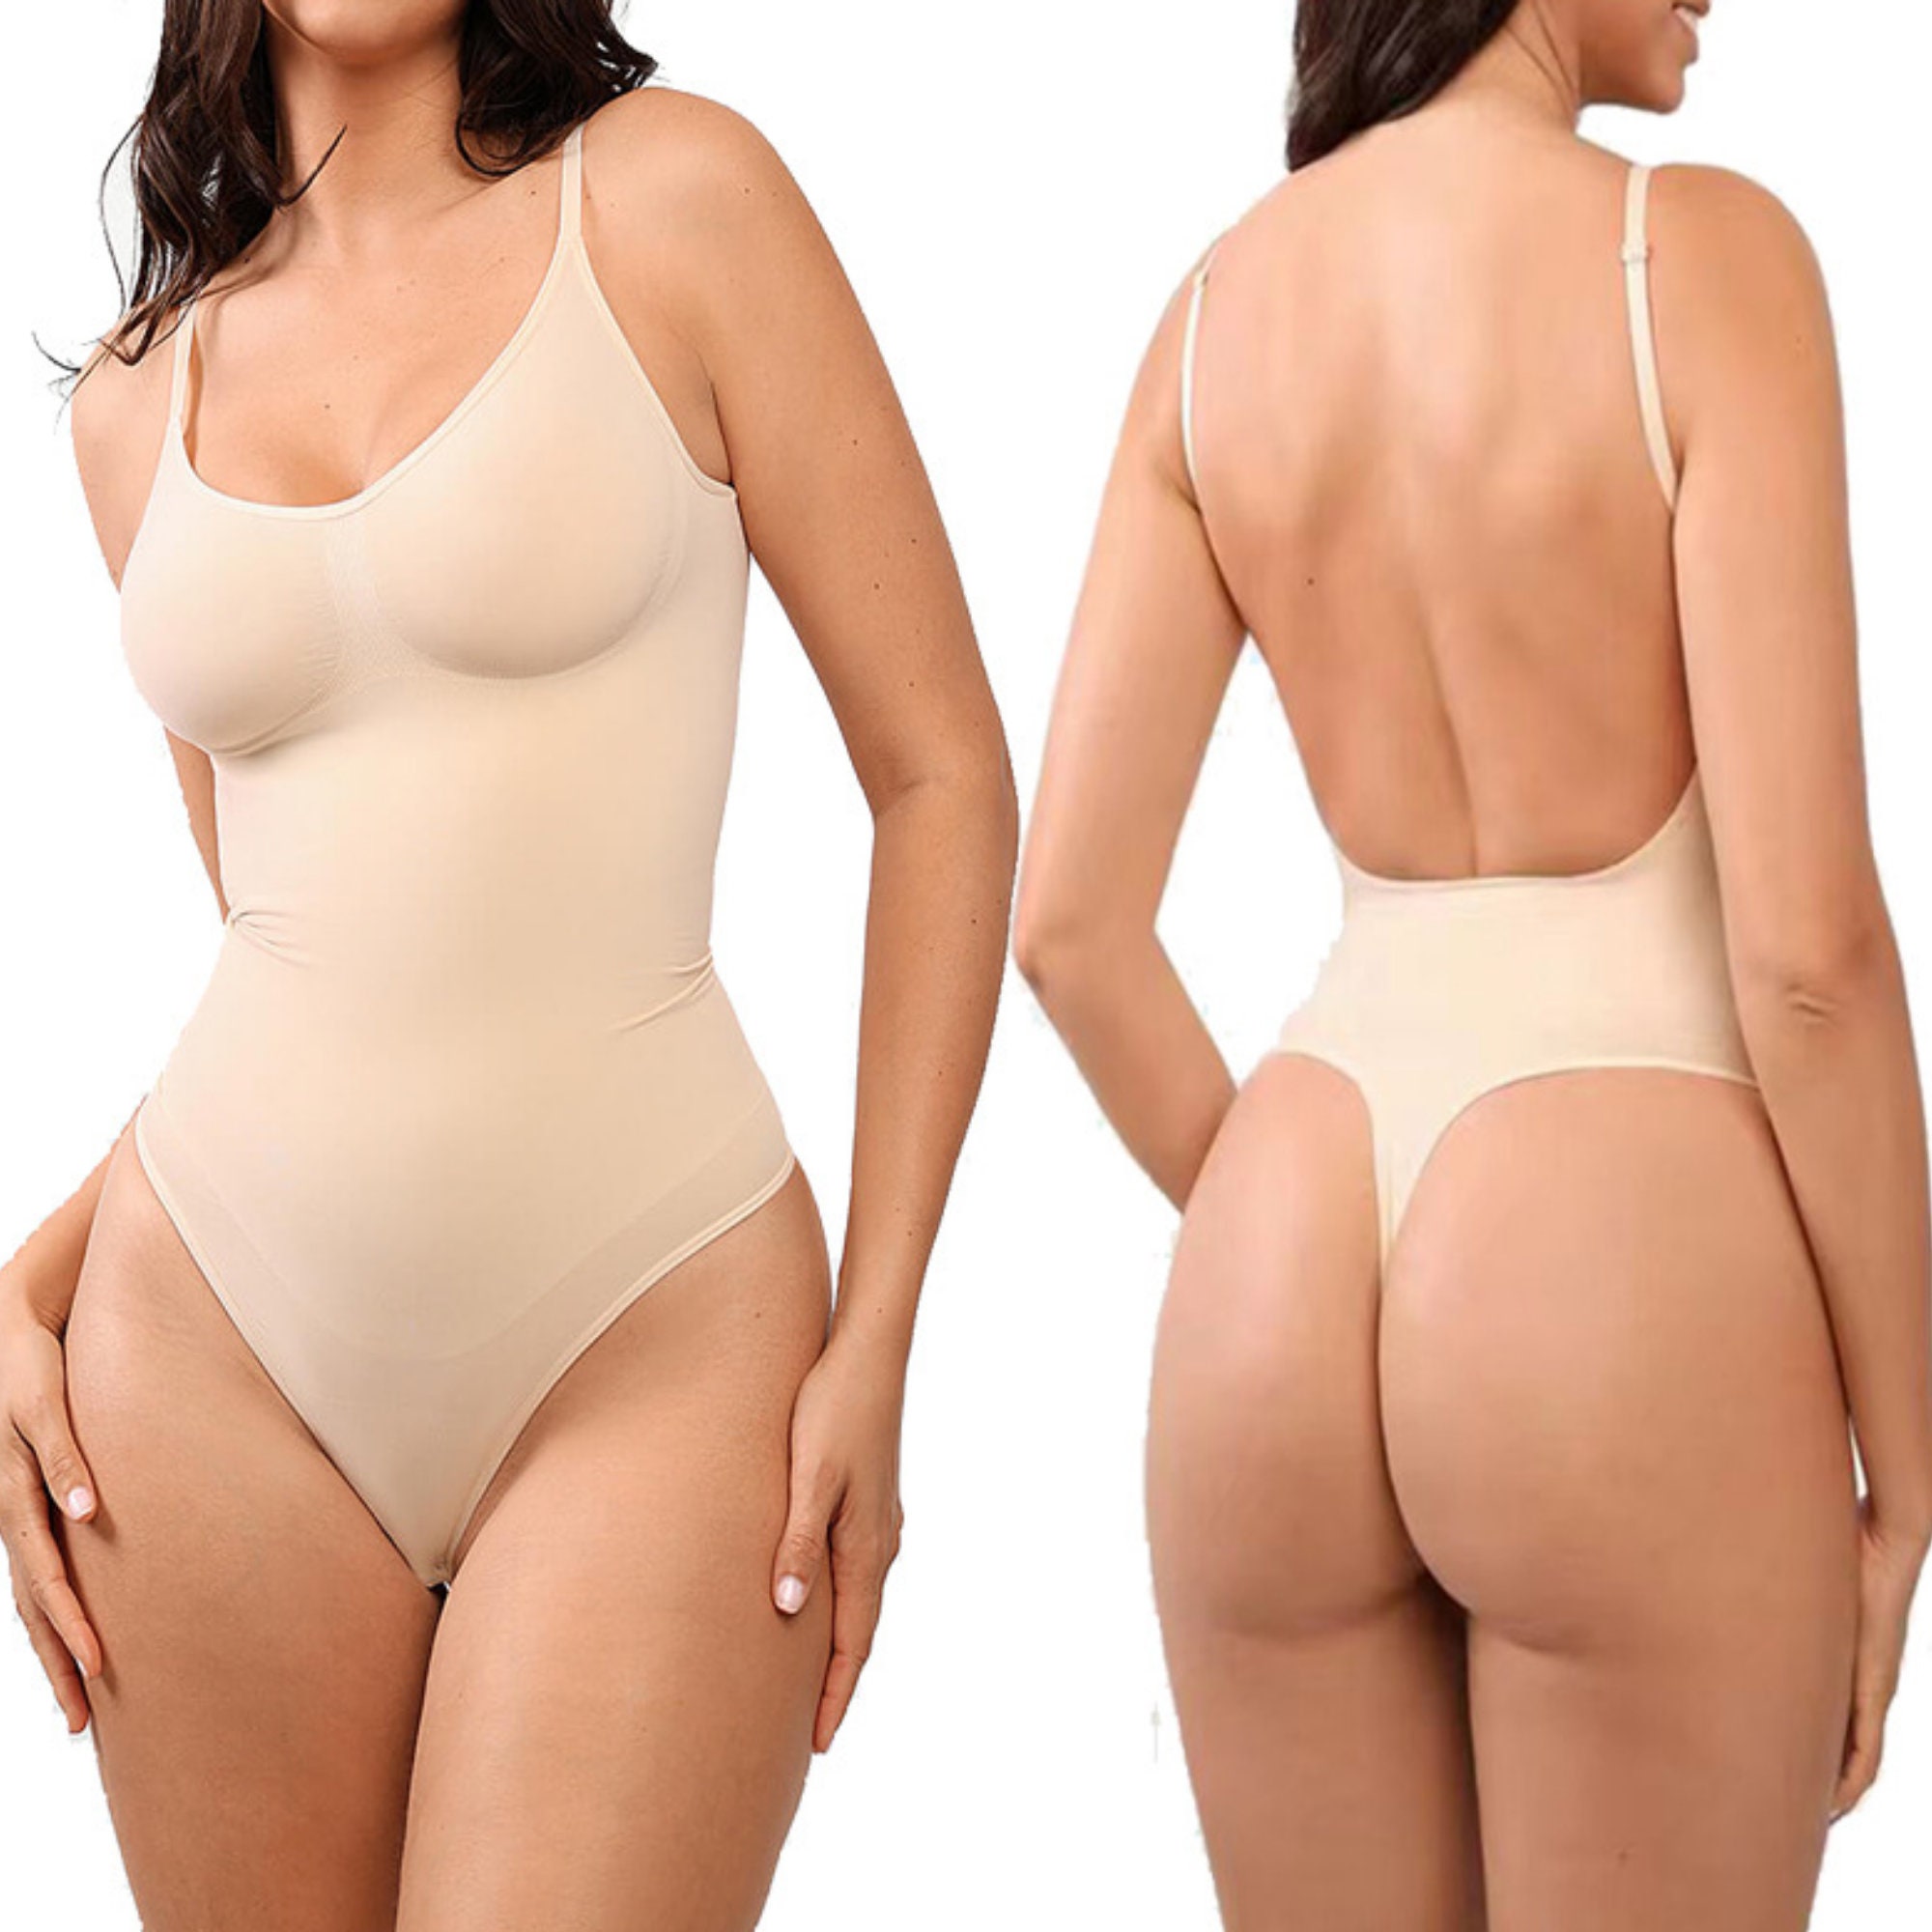 Butt Lifting Shapewear Tummy Control Body Shaper Women High Waisted Shorts  with Hip Dip Pads for Under Dress Slips Seamless Thigh Slimmer (Nude, XXL)  price in Saudi Arabia,  Saudi Arabia